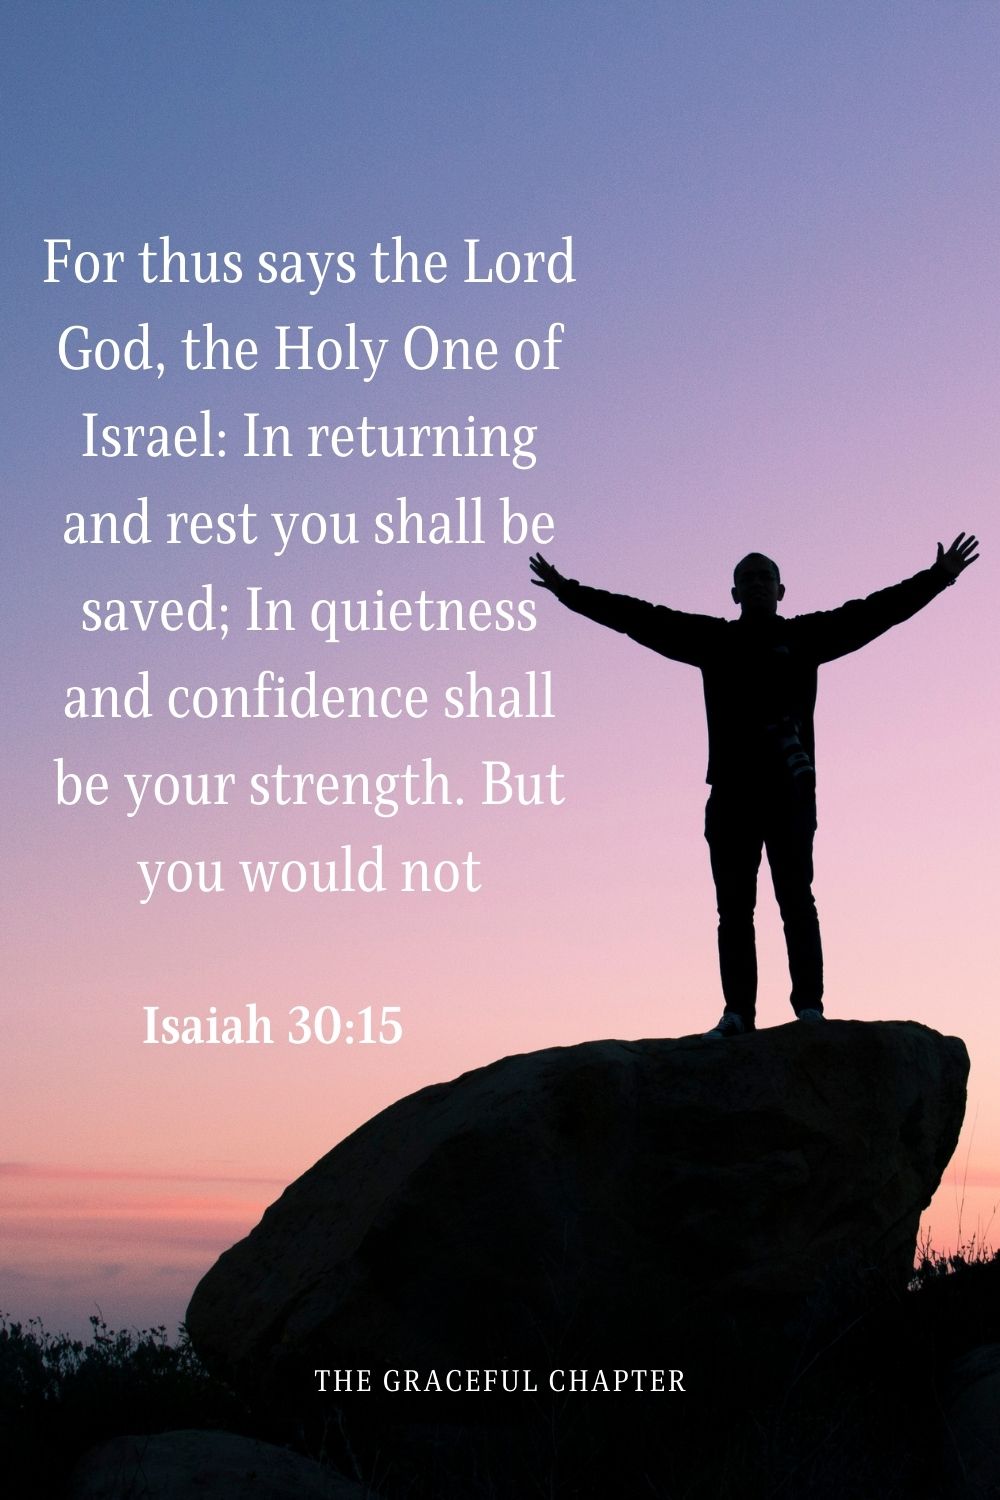 For thus says the Lord God, the Holy One of Israel: In returning and rest you shall be saved; In quietness and confidence shall be your strength. But you would not,